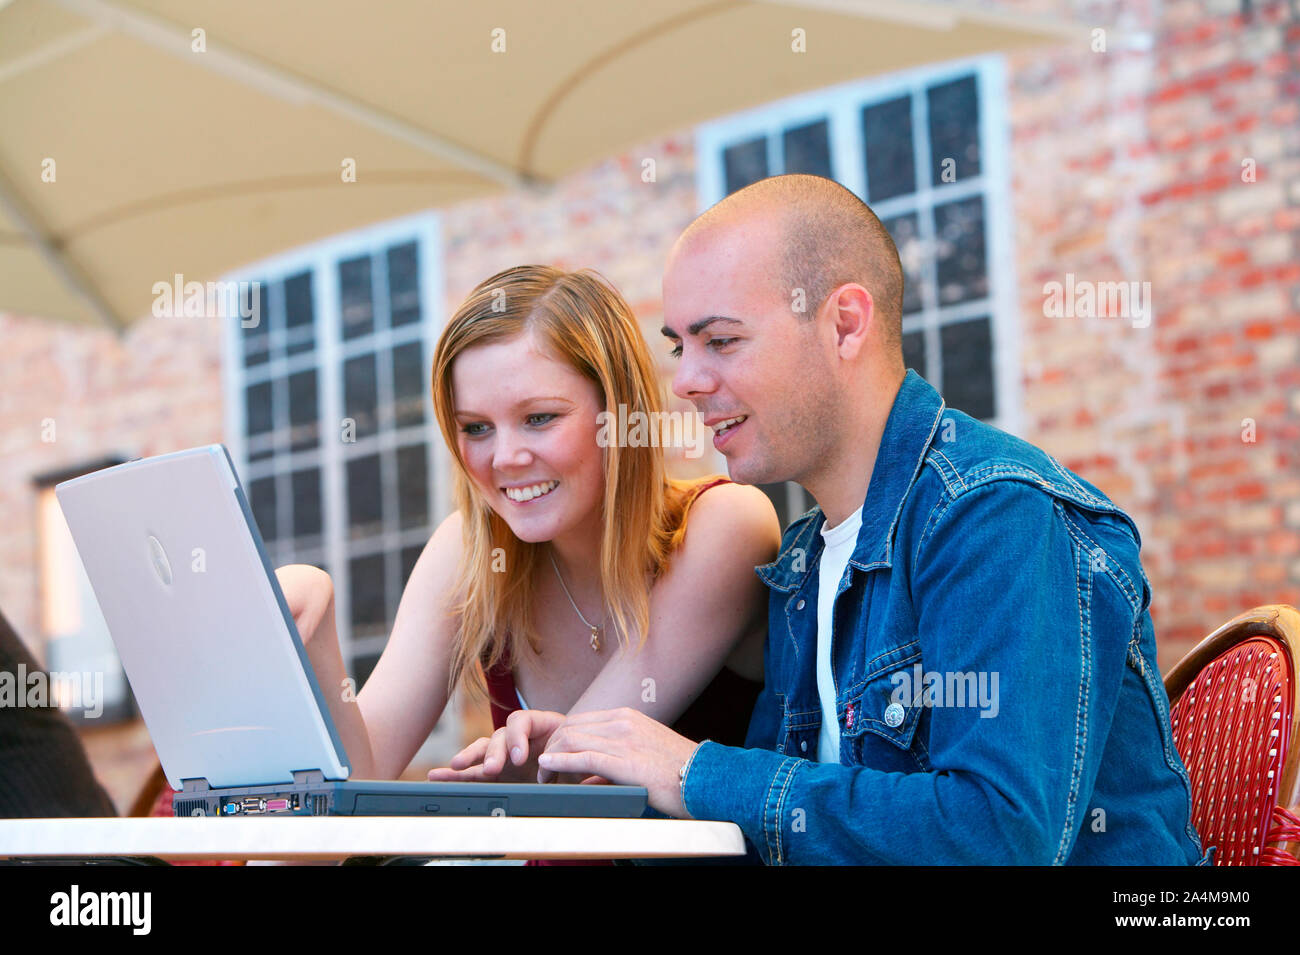 Young lady and man with laptop Stock Photo